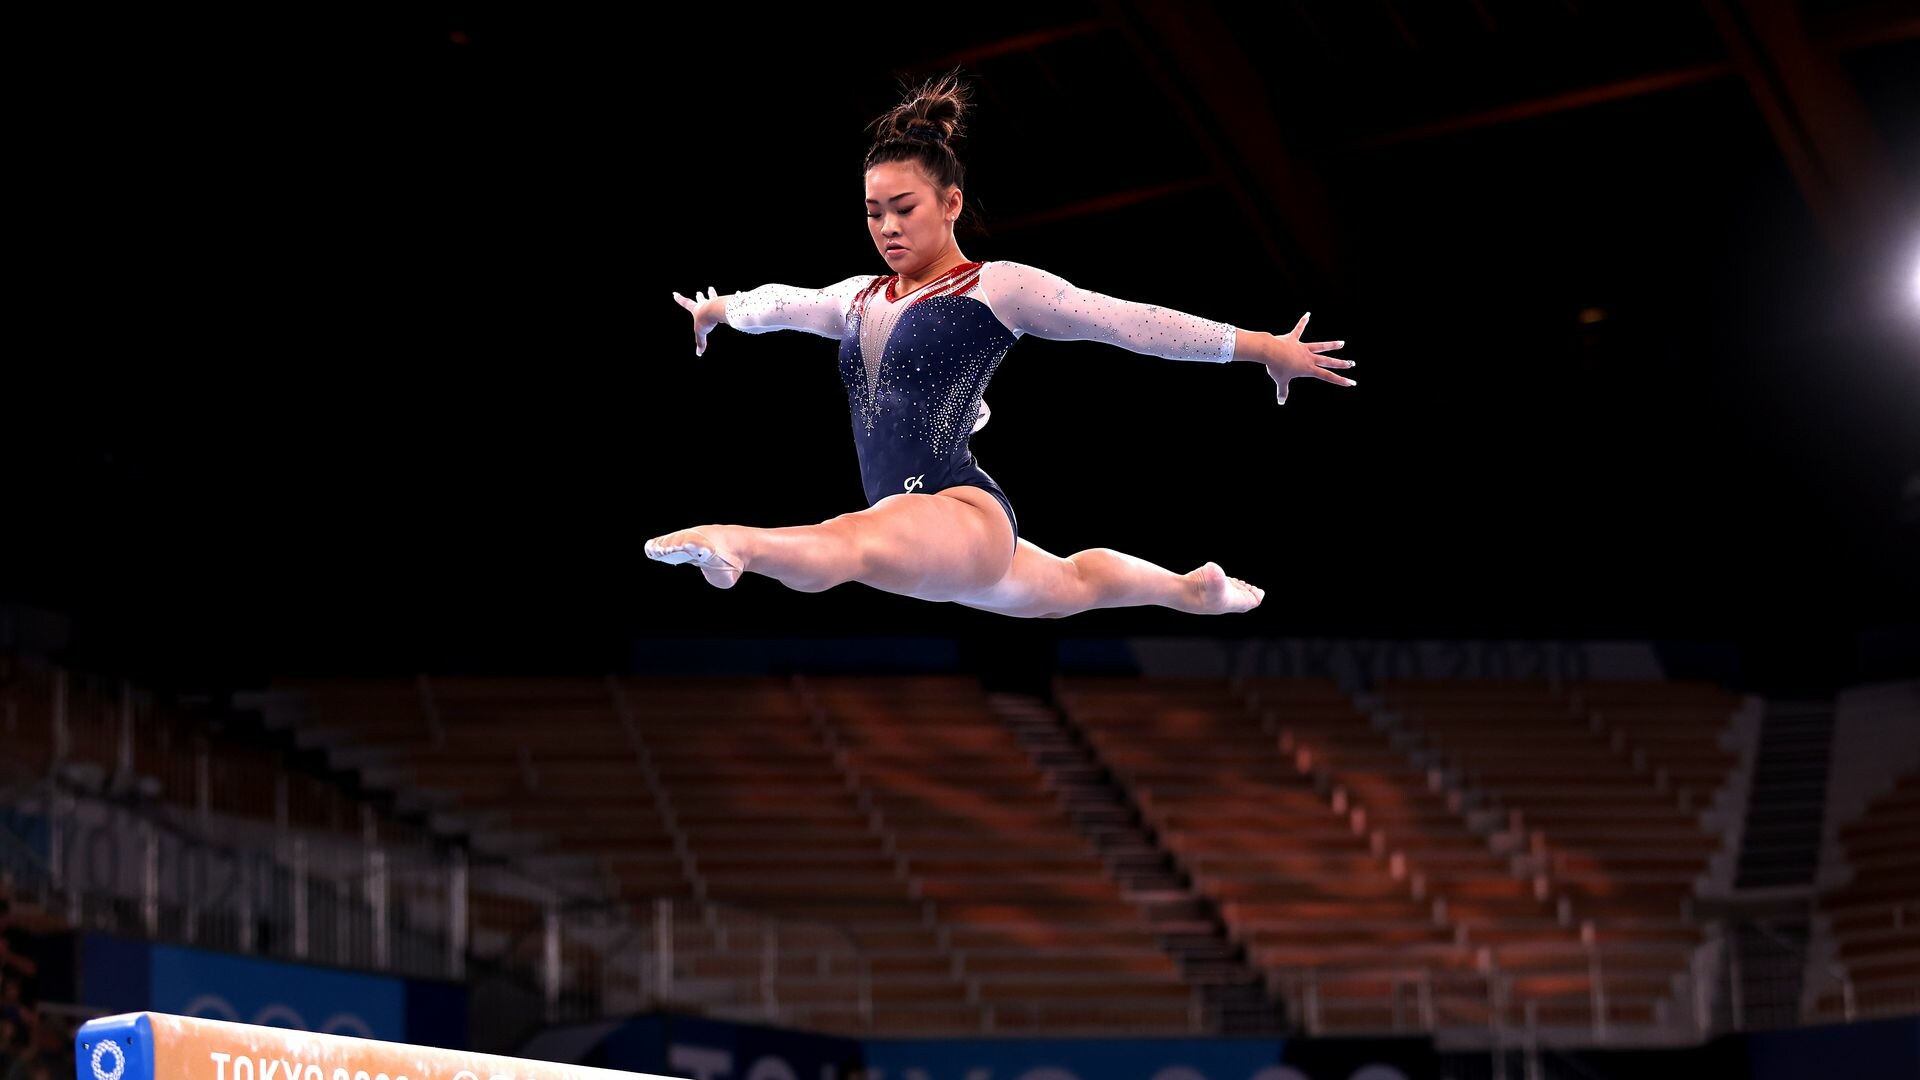 Sunisa Lee: She finished the 2021 National Championships second in the all-around. 1920x1080 Full HD Wallpaper.